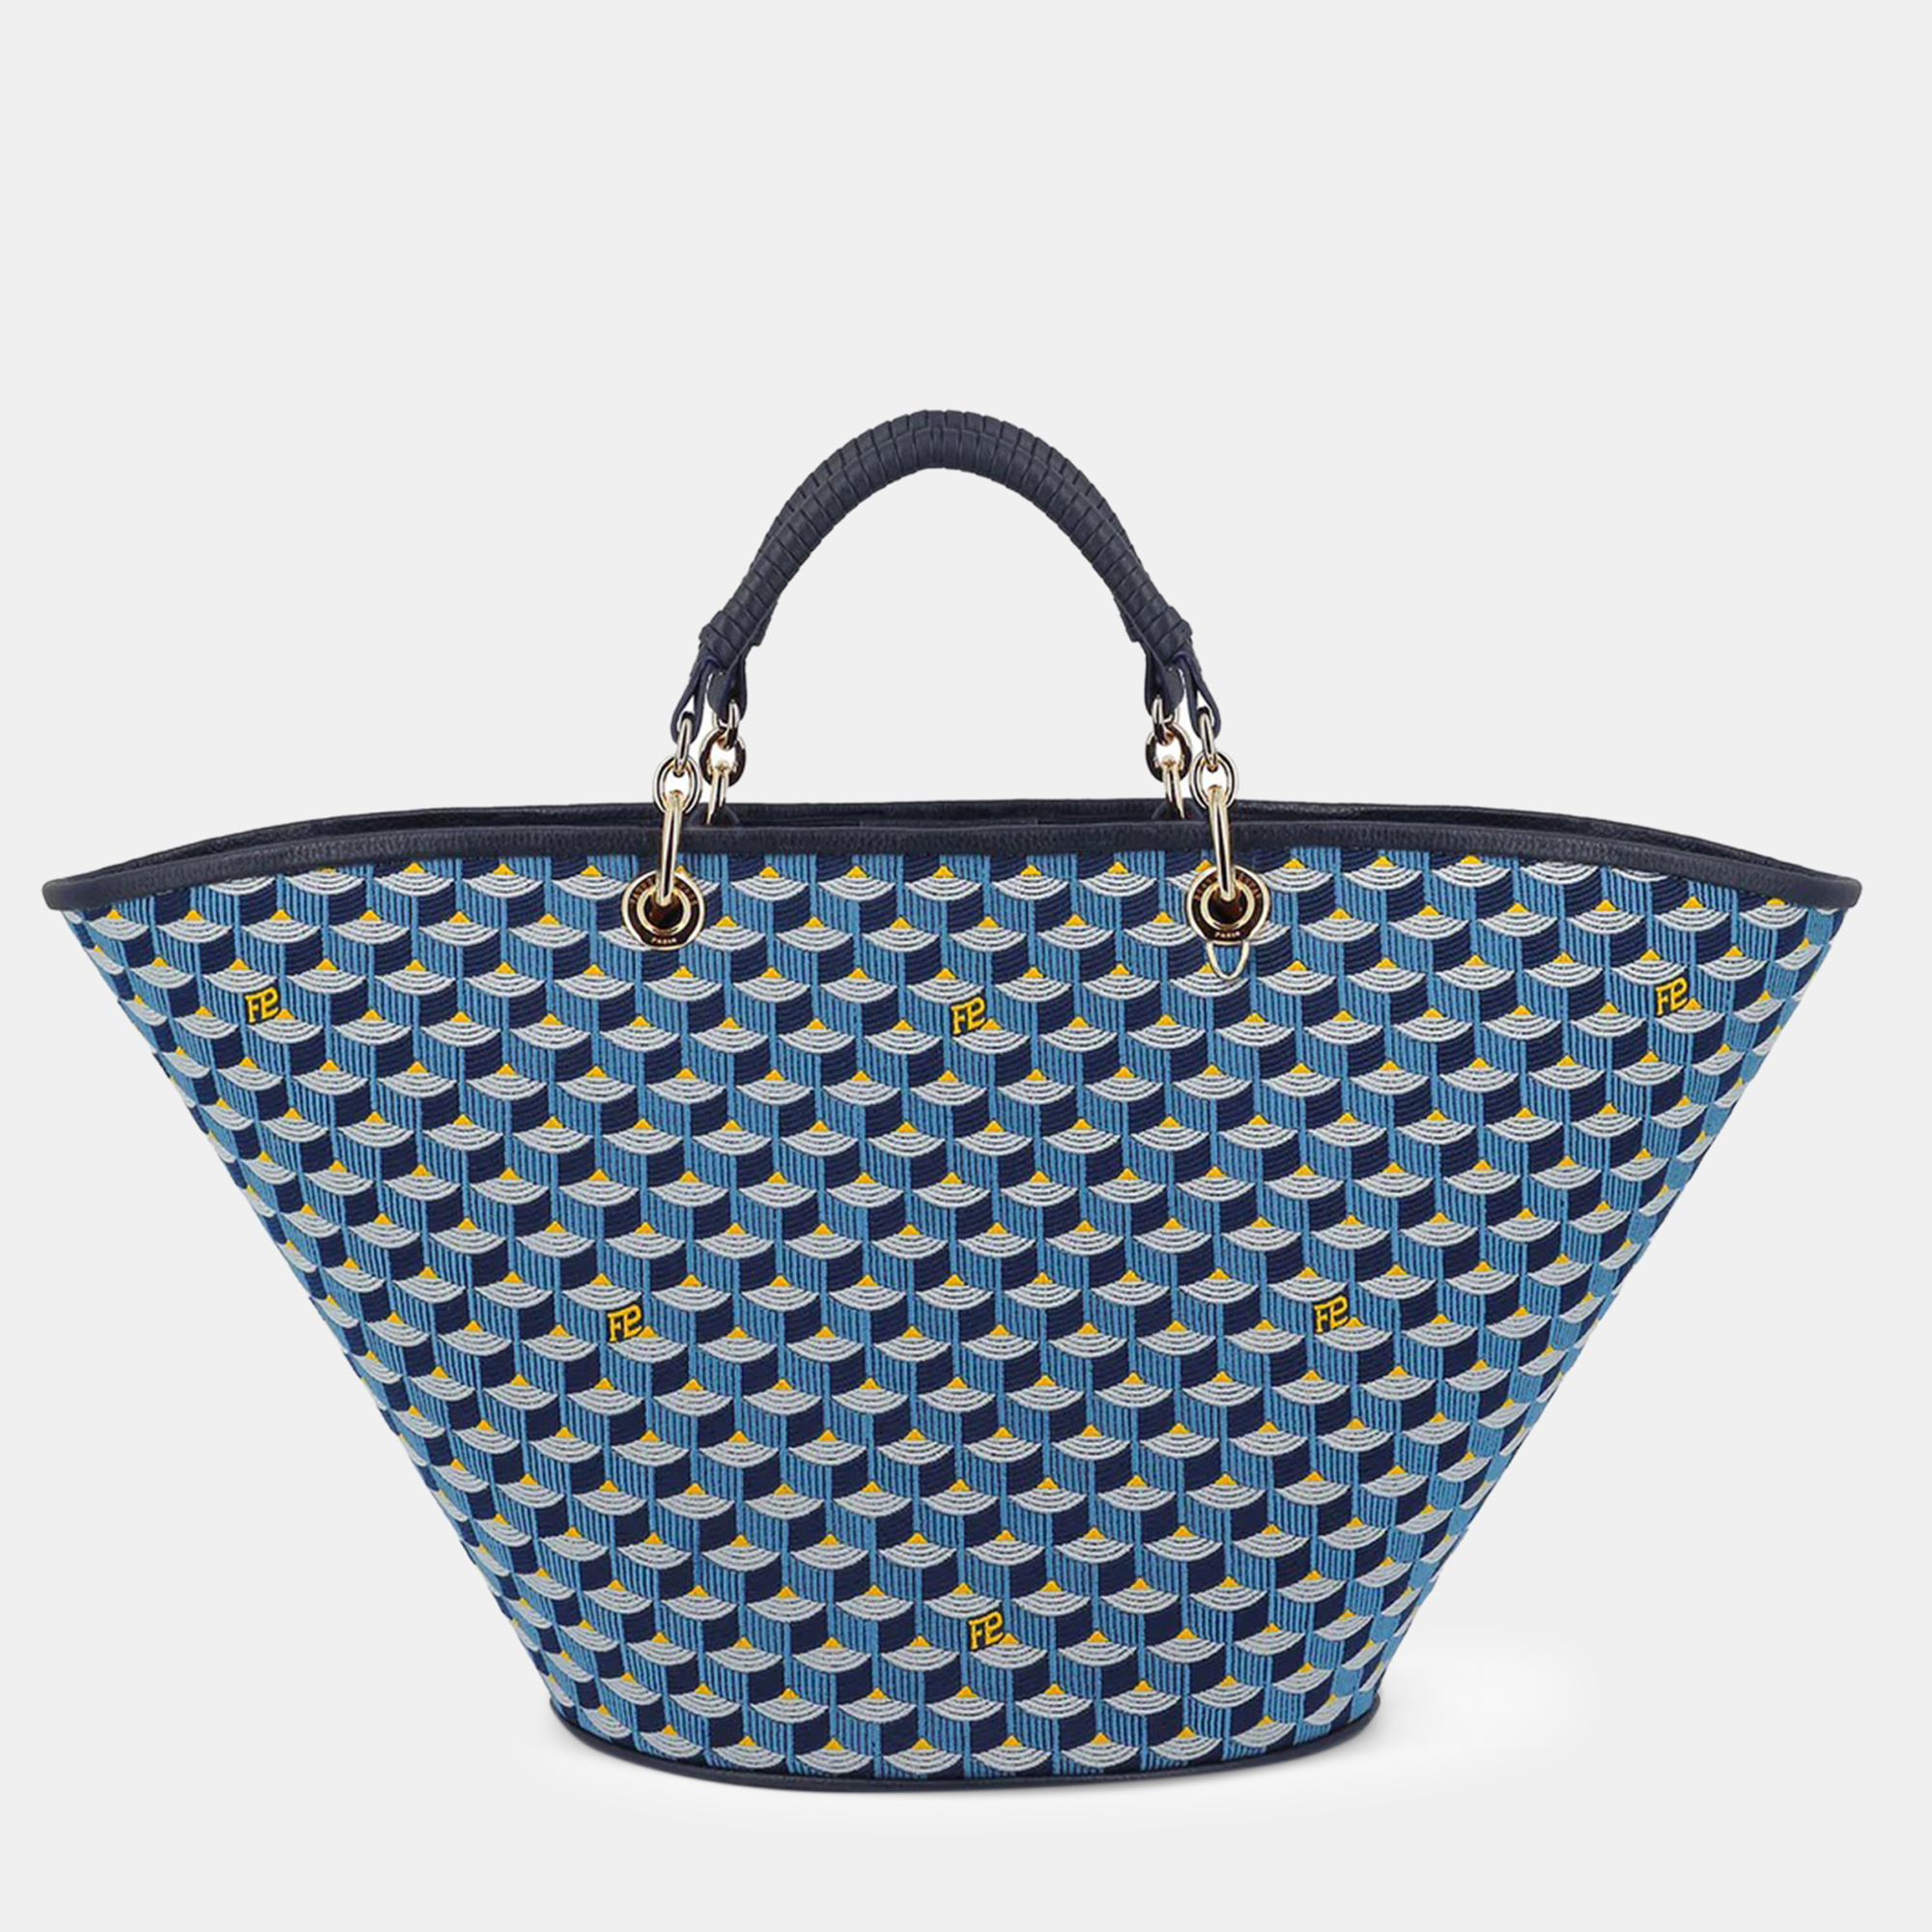 Faure le page navy blue leather tote